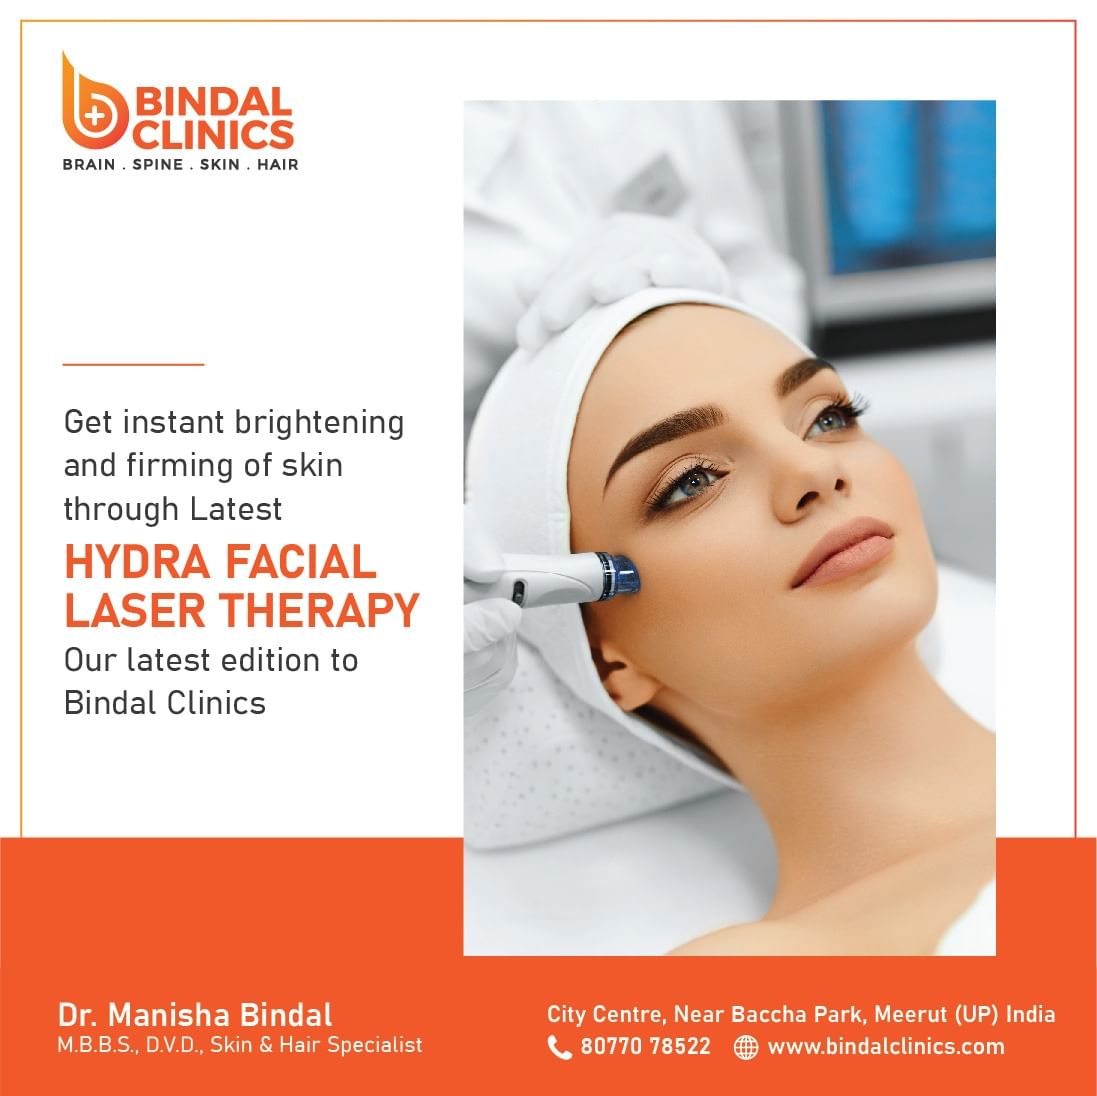 Dr. Manisha Bindal - Book Appointment, Consult Online, View Fees, Contact  Number, Feedbacks | Dermatologist in Meerut